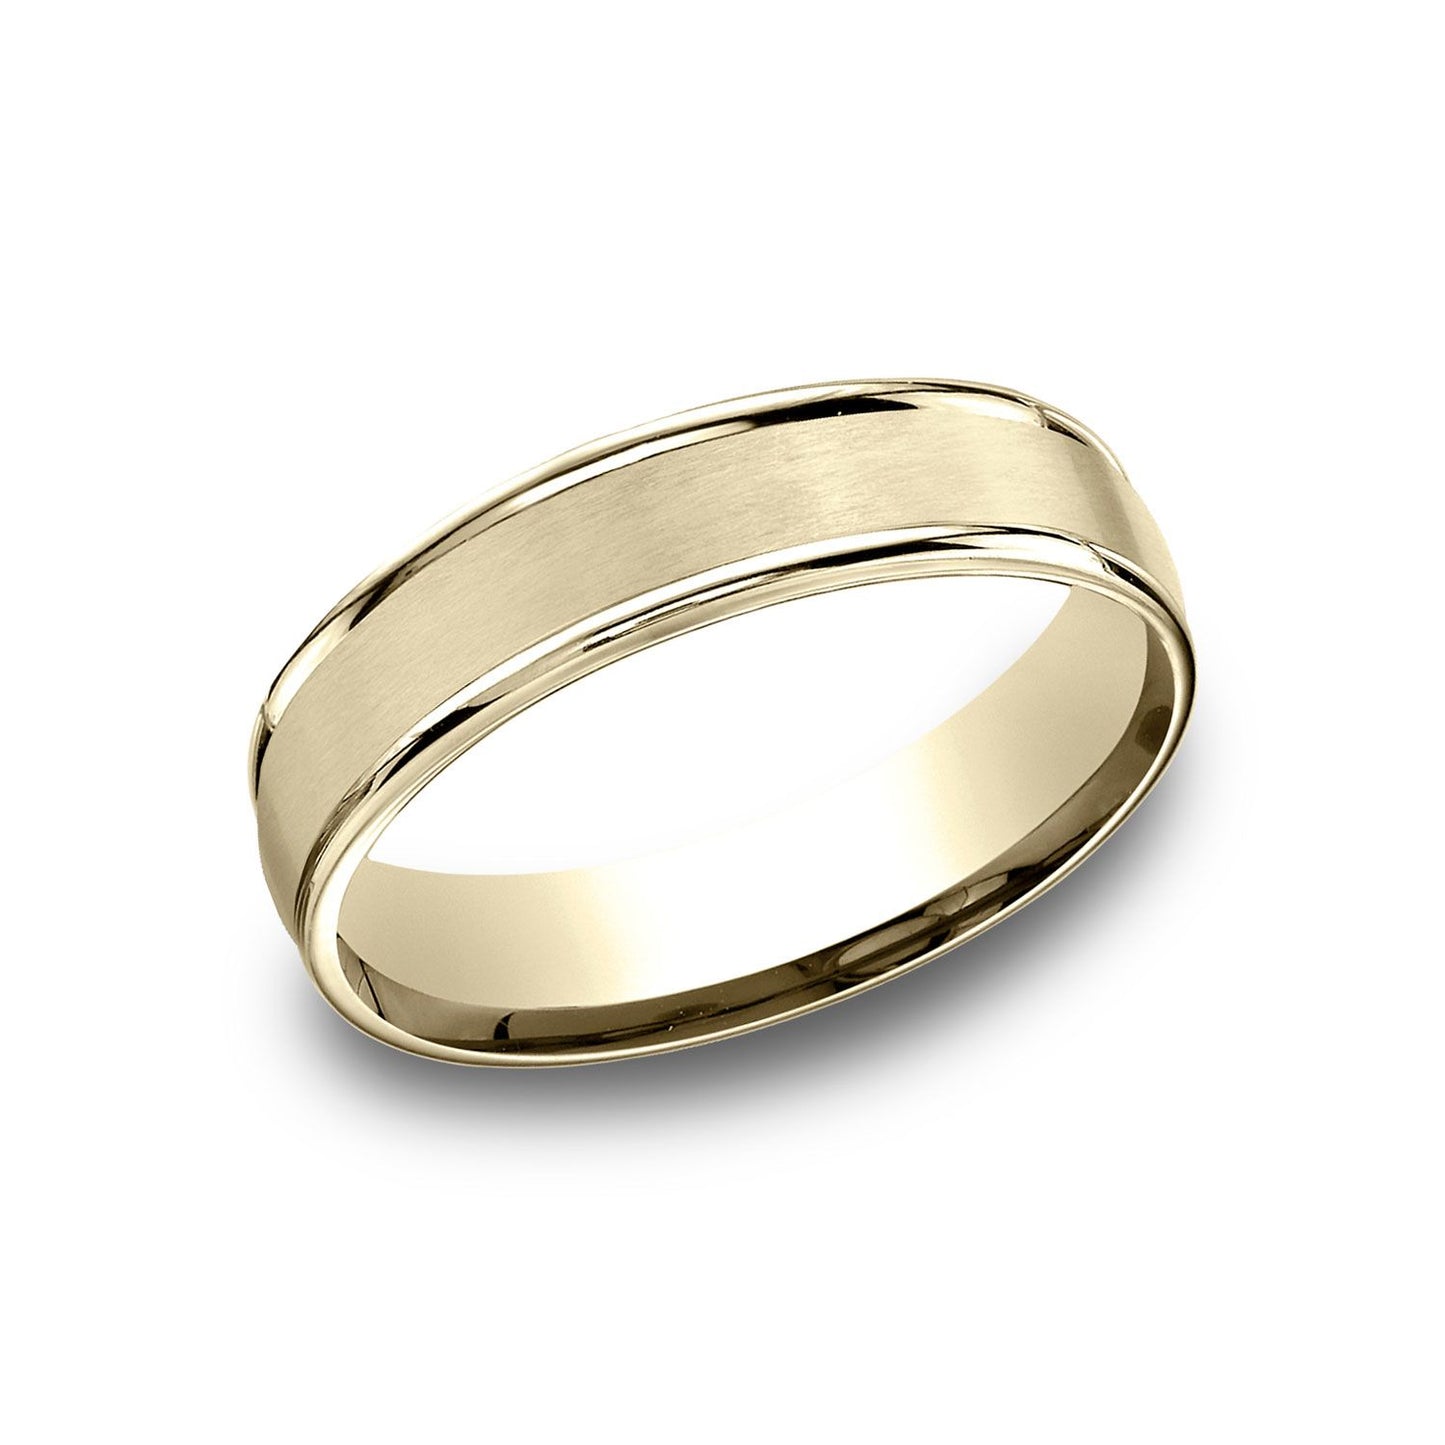 14k Yellow Gold 5mm Comfort-fit Satin Finish High Polished Round Edge Carved Design Band